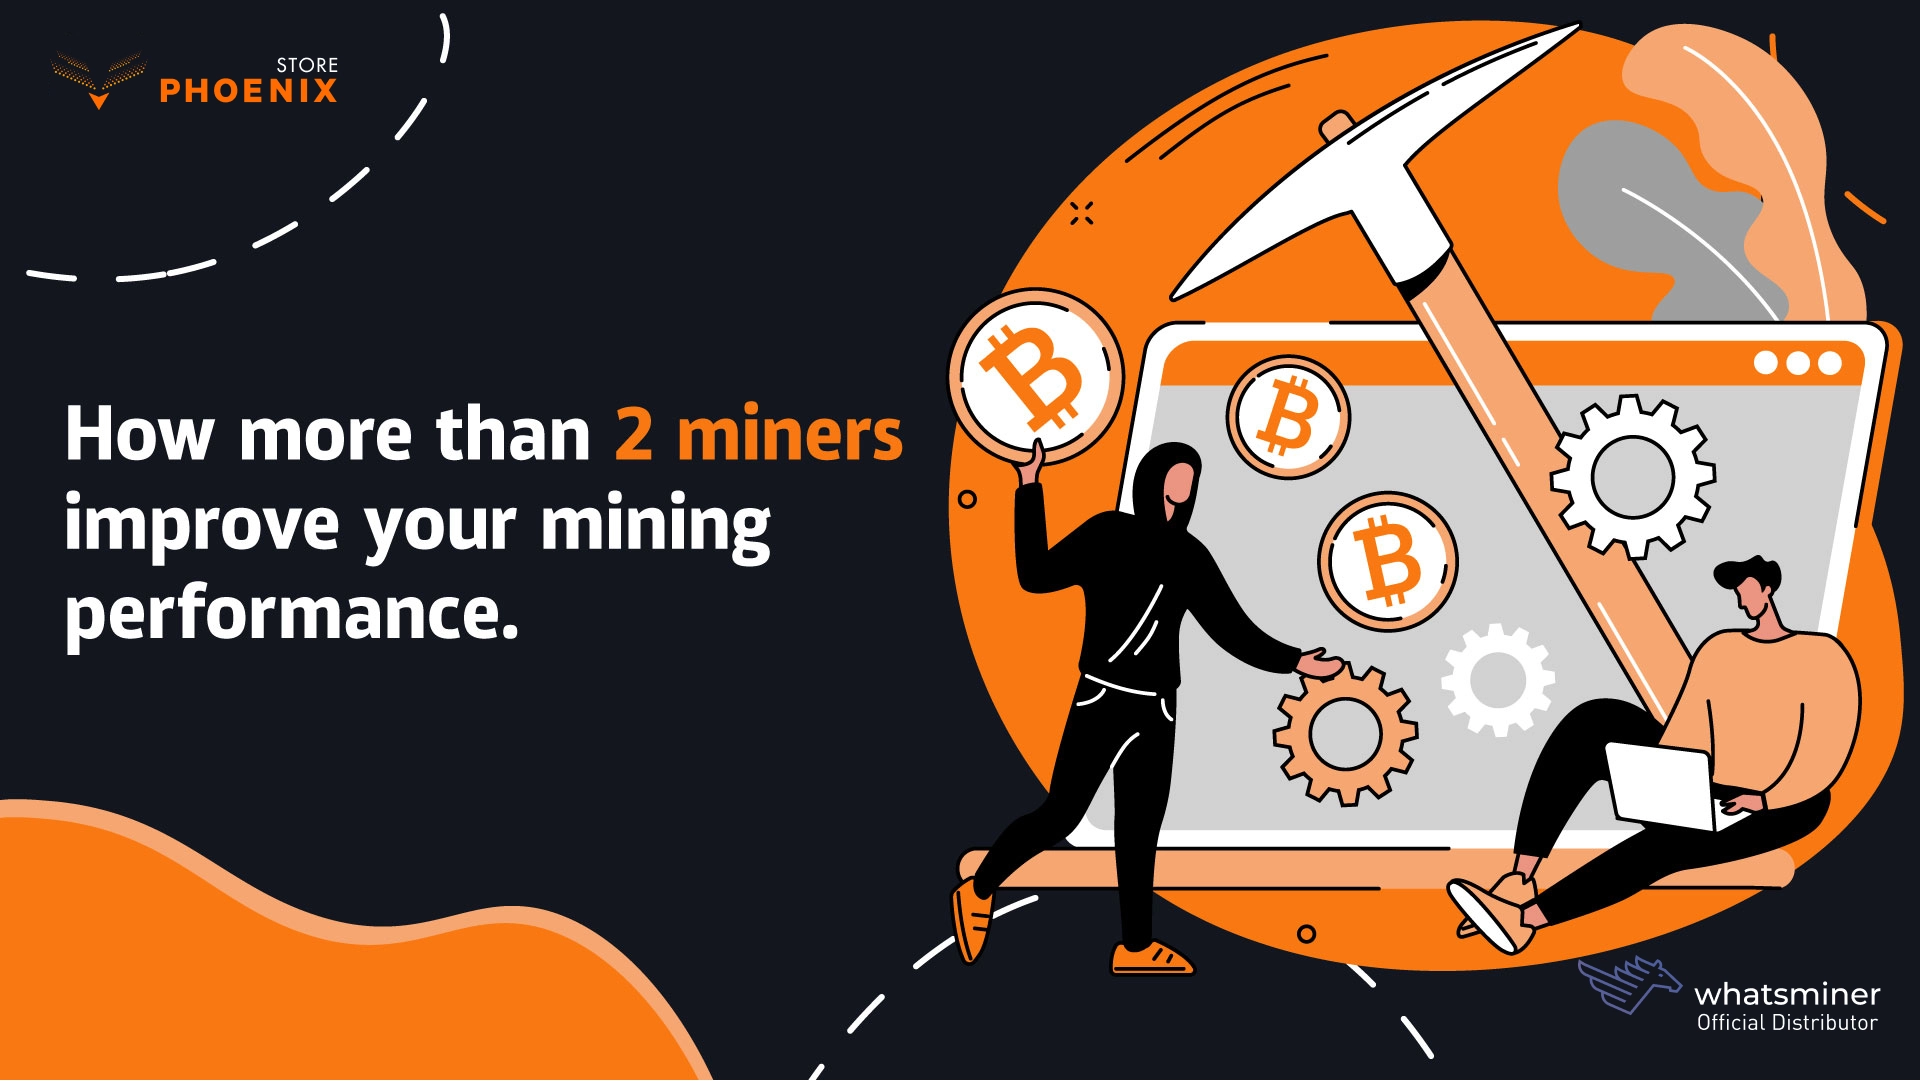 How more than 2 miners improve your mining performance?